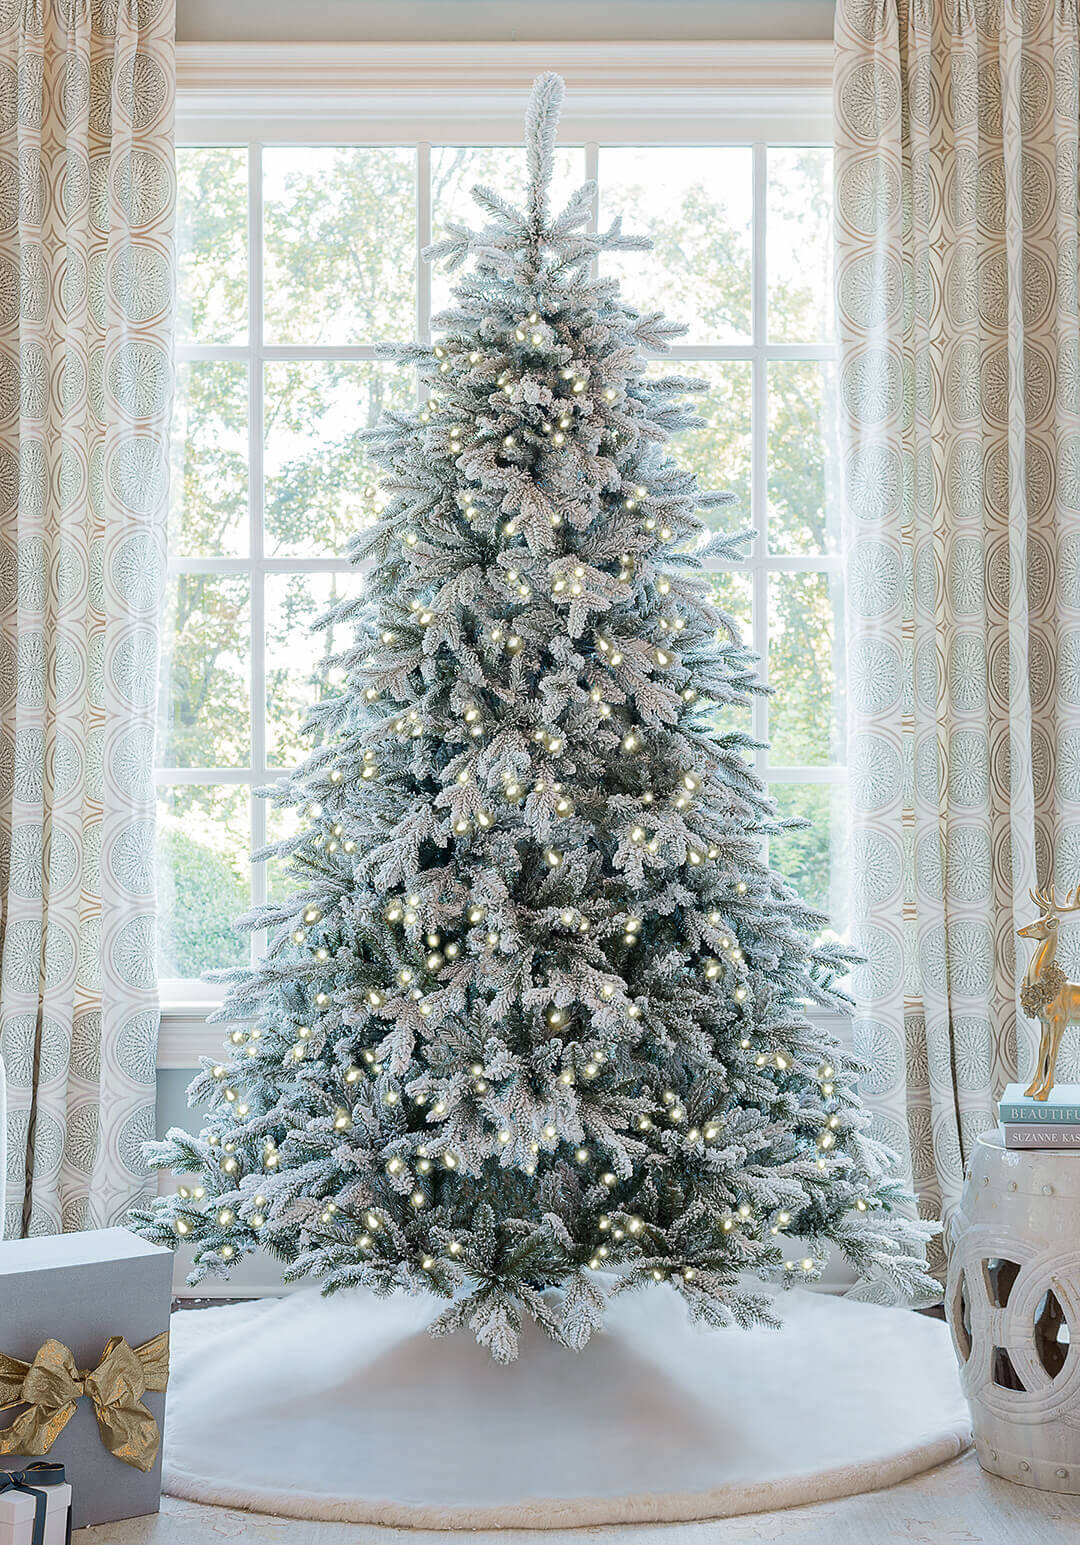 King of Christmas 10' Queen Flock® Artificial Christmas Tree with 1300 Warm White LED Lights